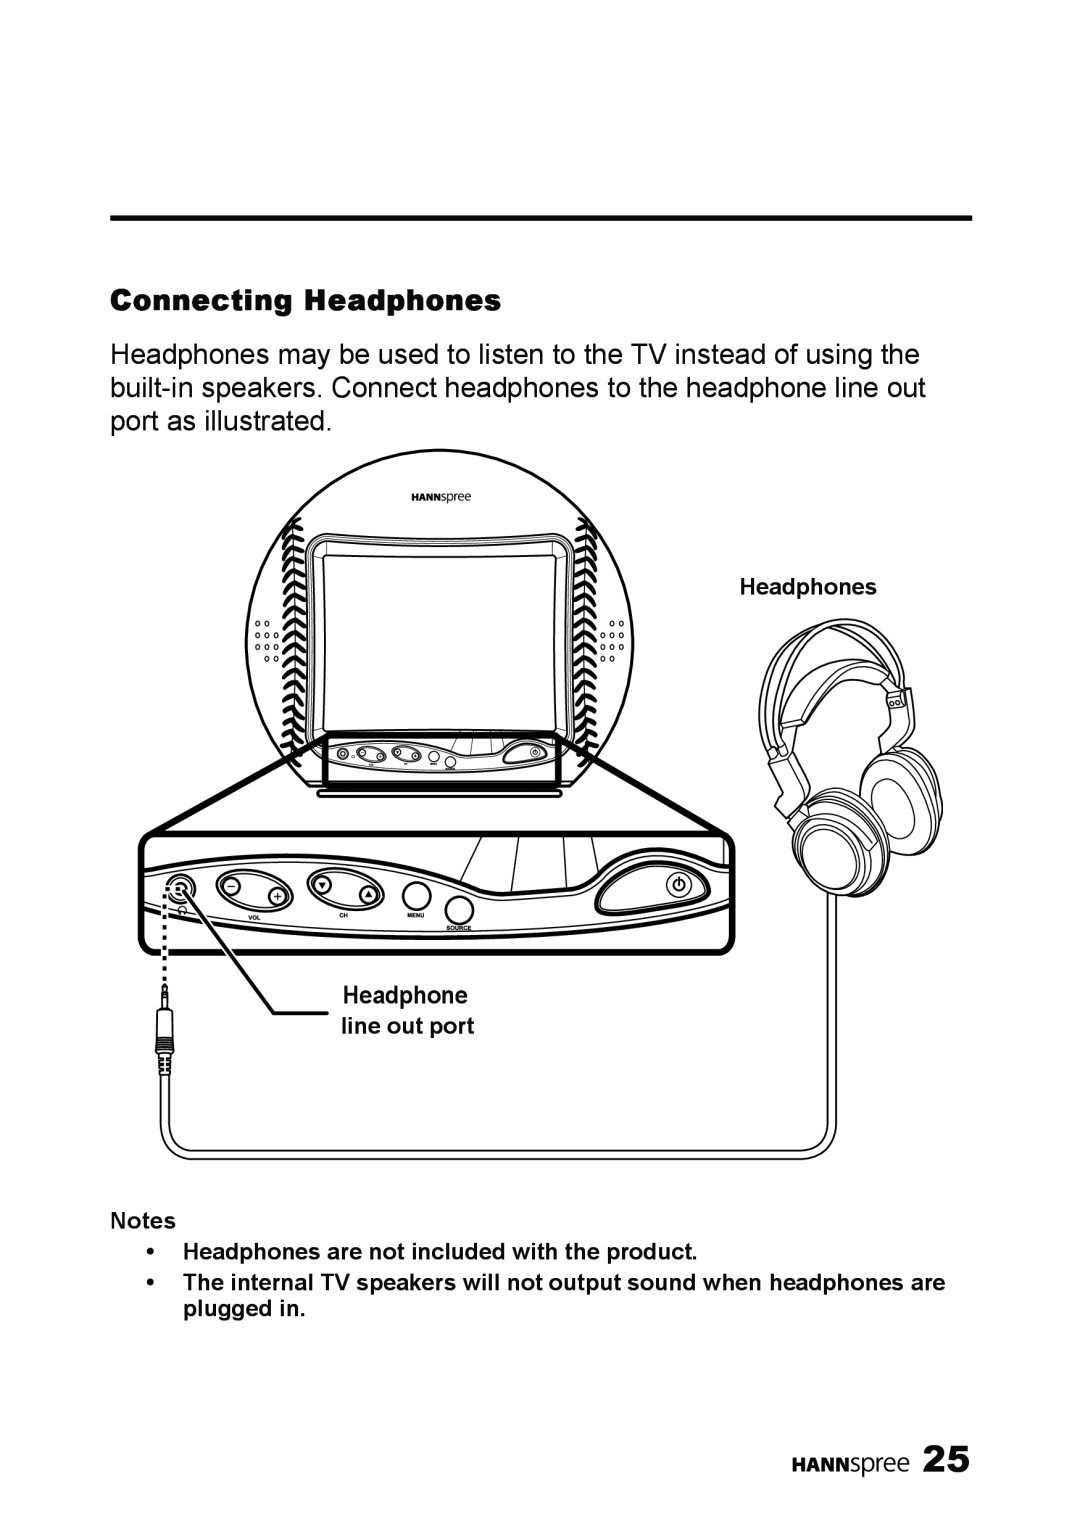 HANNspree ST09-10A1 user manual Connecting Headphones, line out port, Headphones are not included with the product 